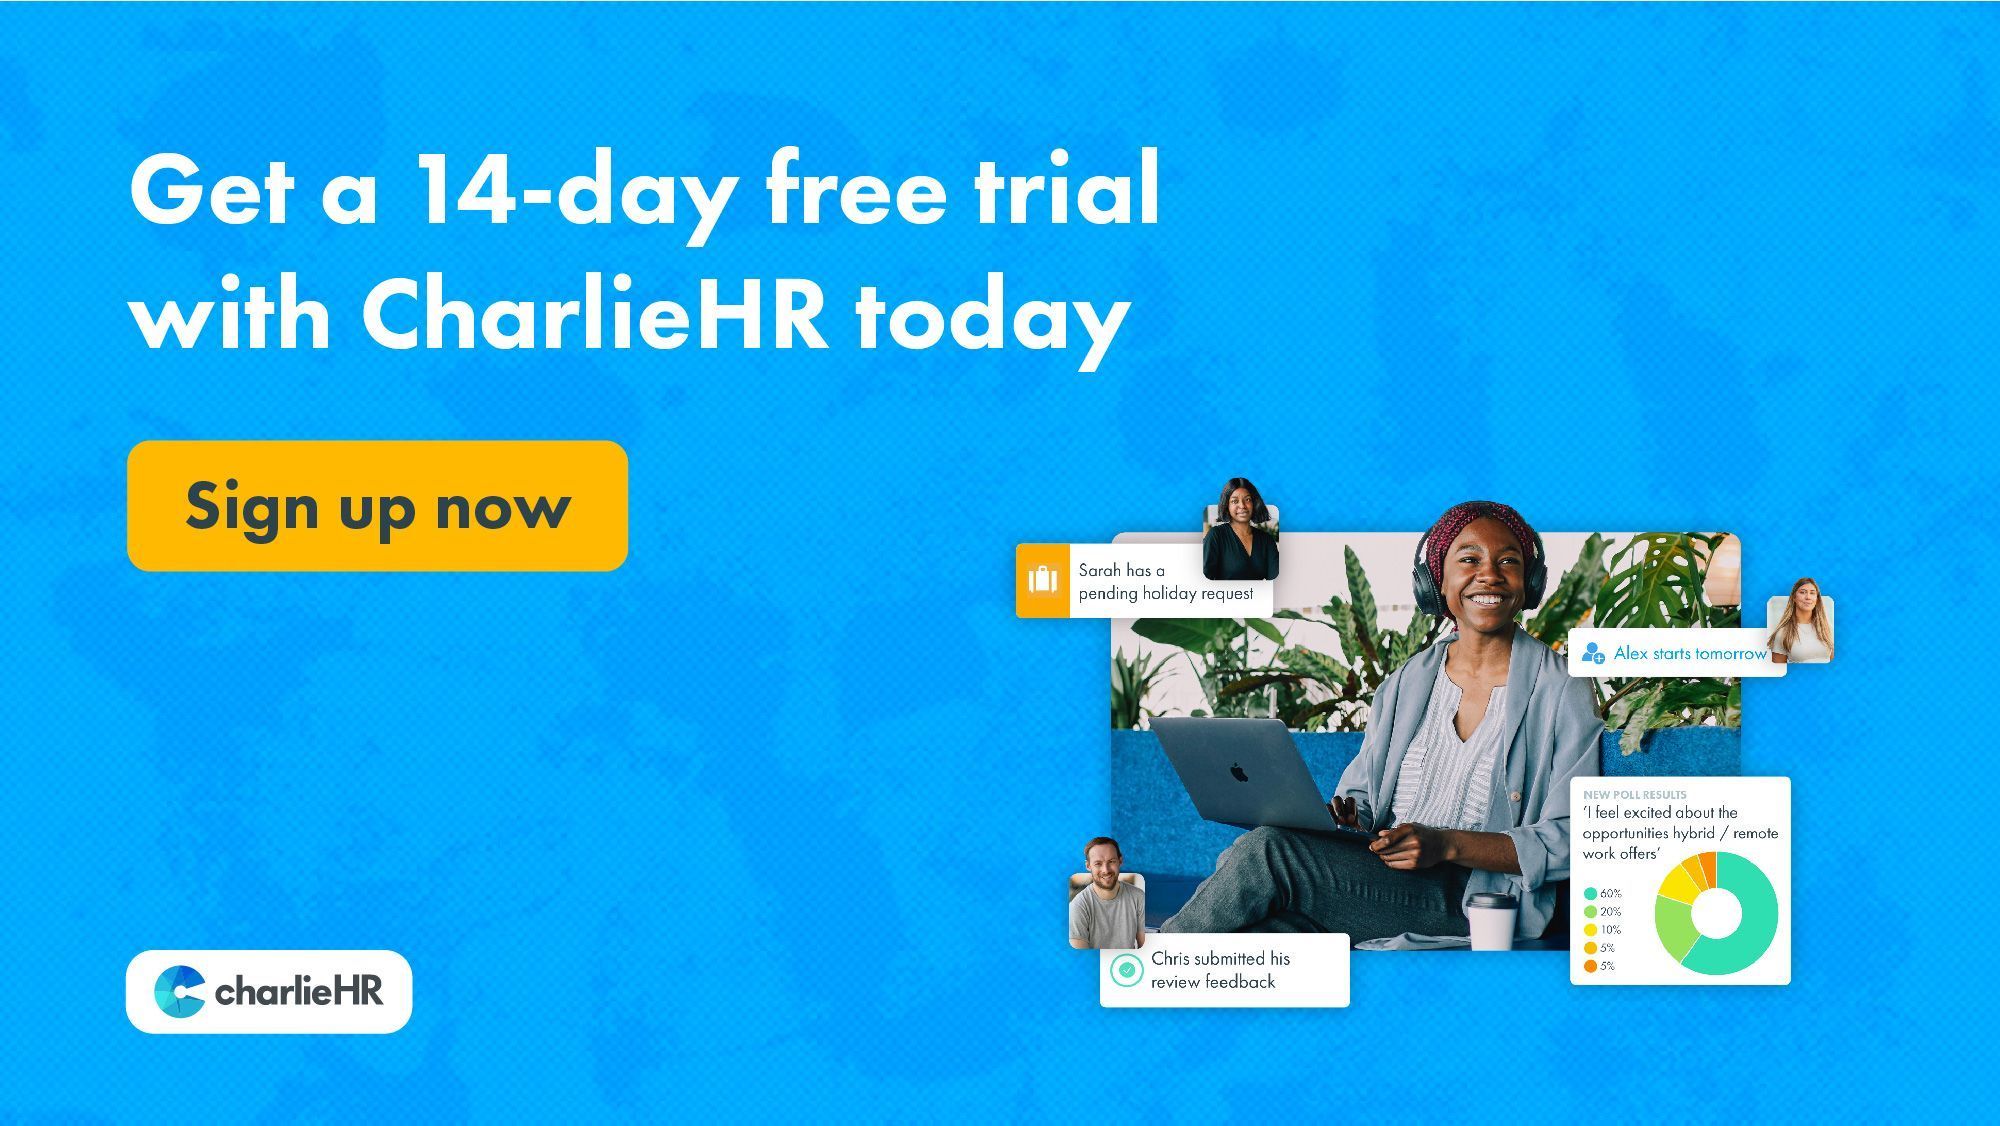 Click here to start a free trial with CharlieHR. Free for 14 days. No credit card required.